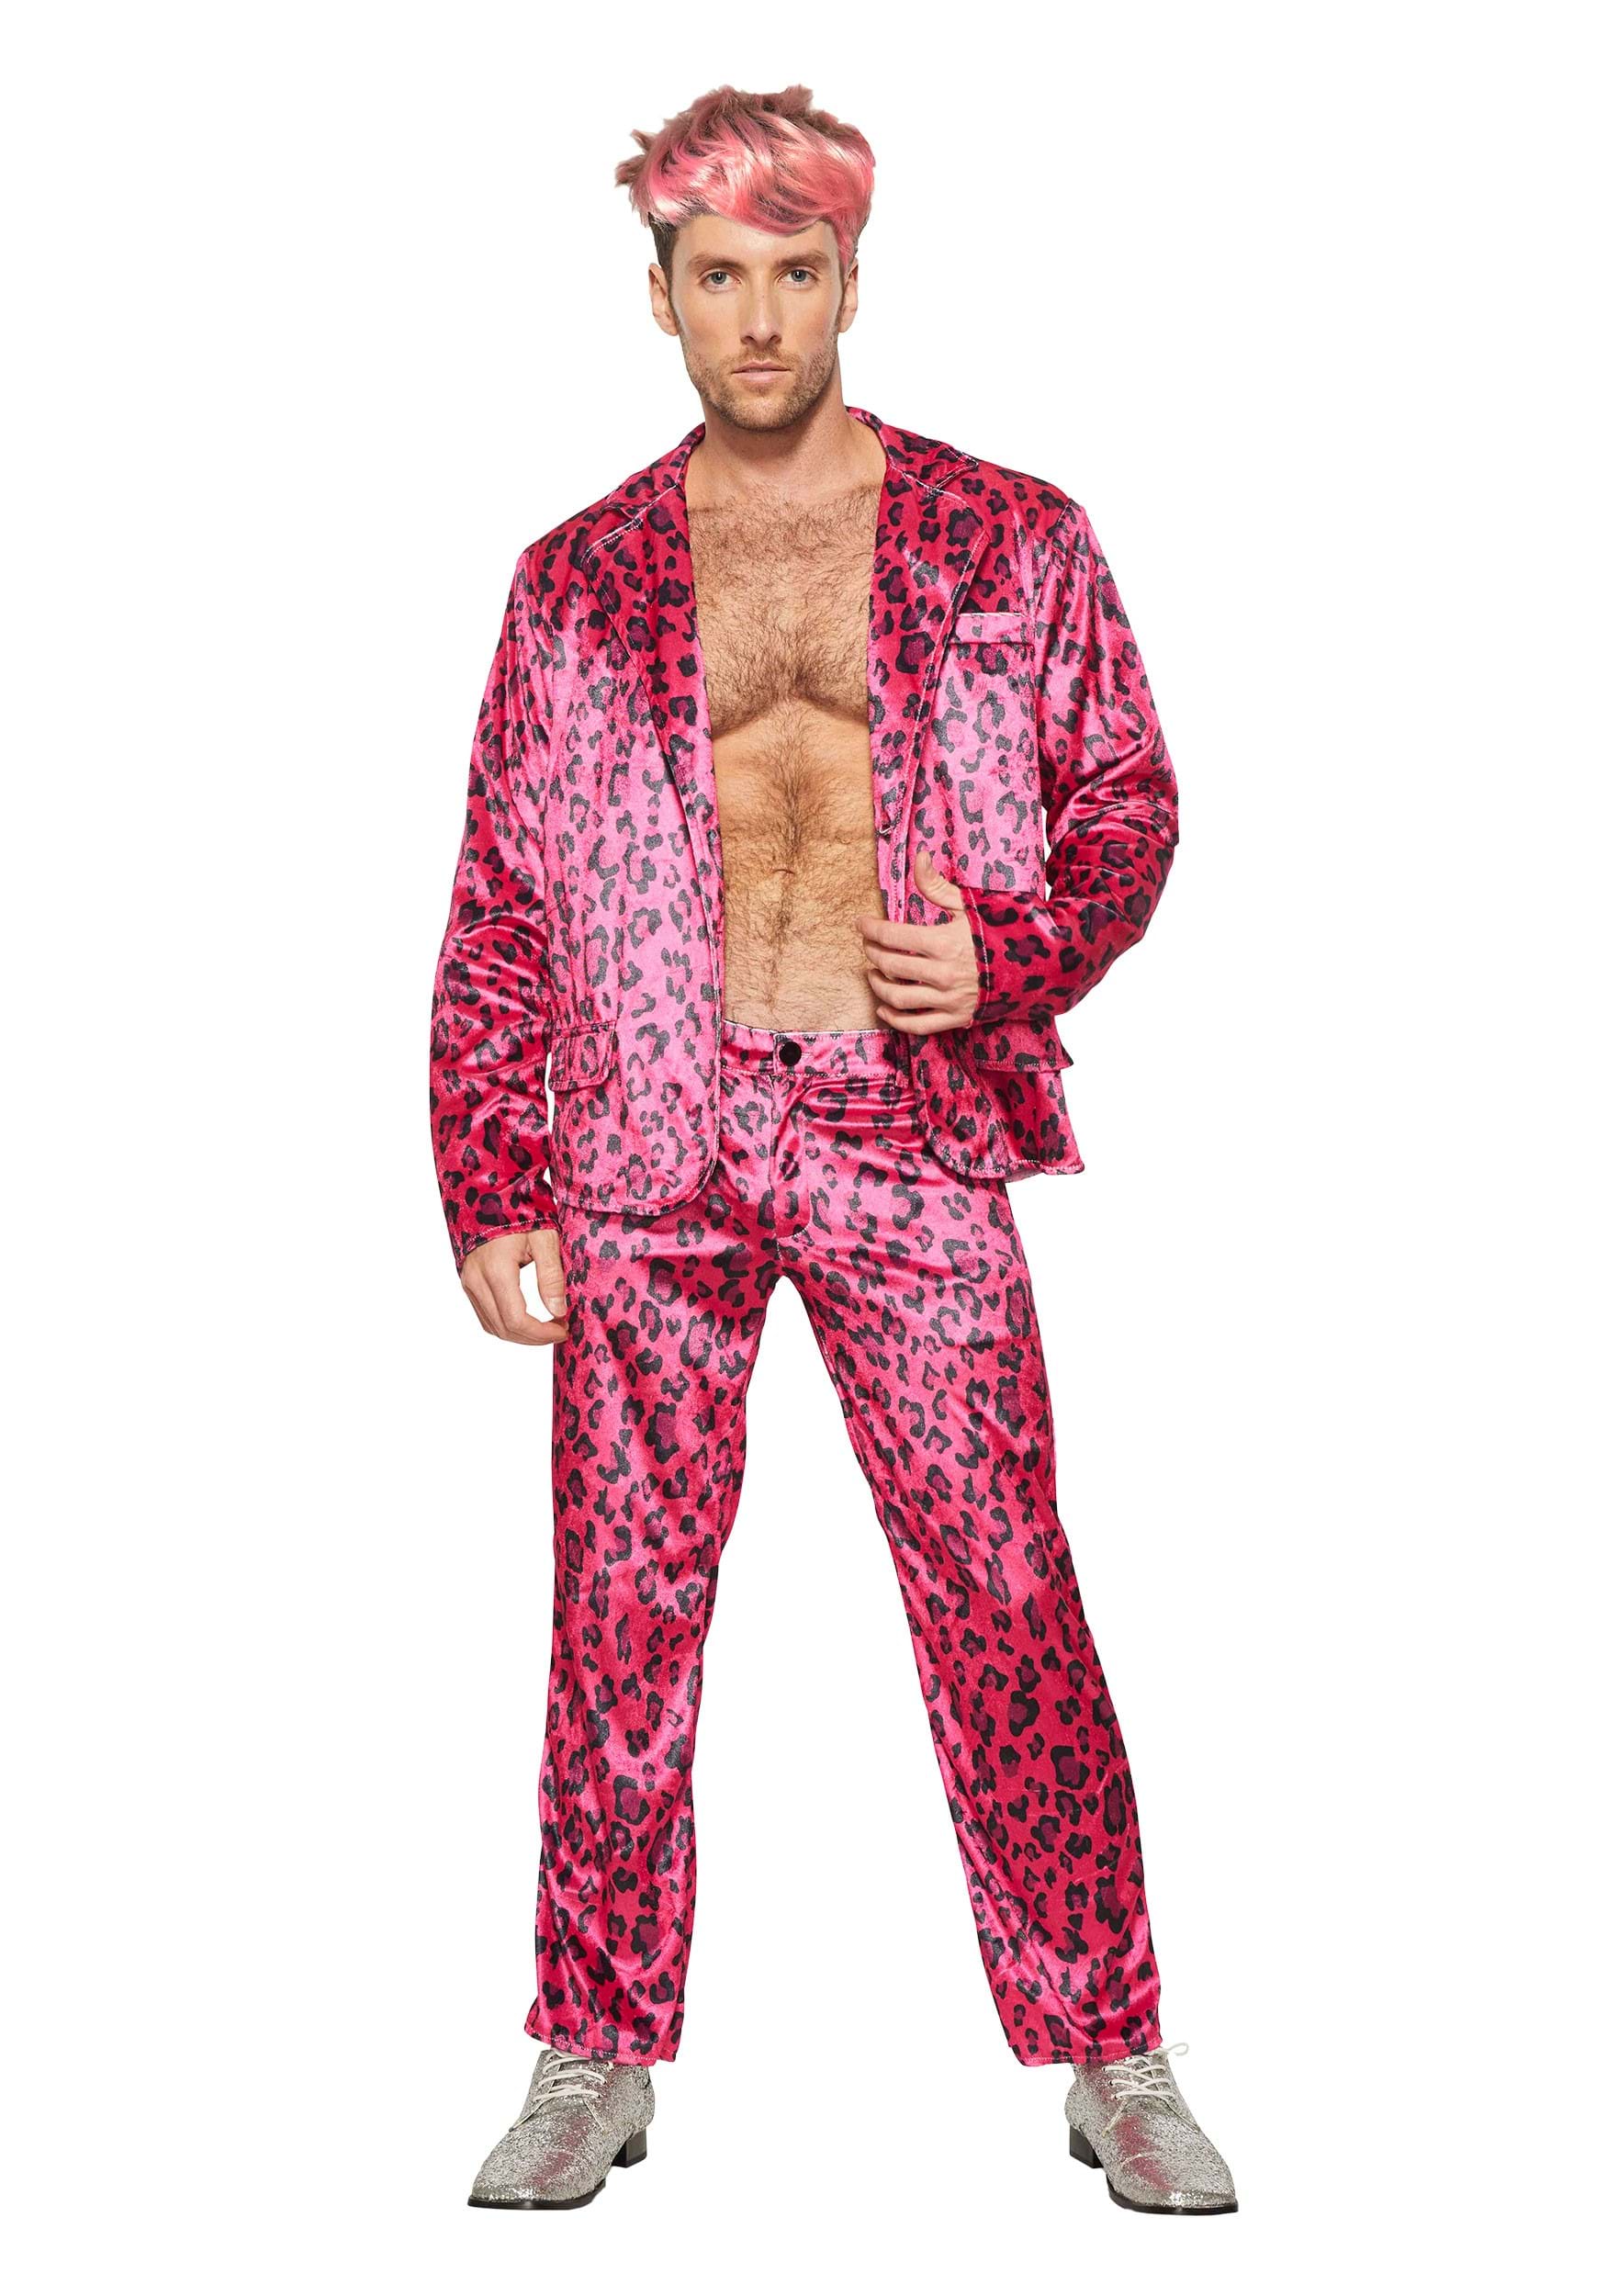 Image of Pink Leopard Rock Star Men's Costume | Celebrity Costumes ID SG80203P-XXL